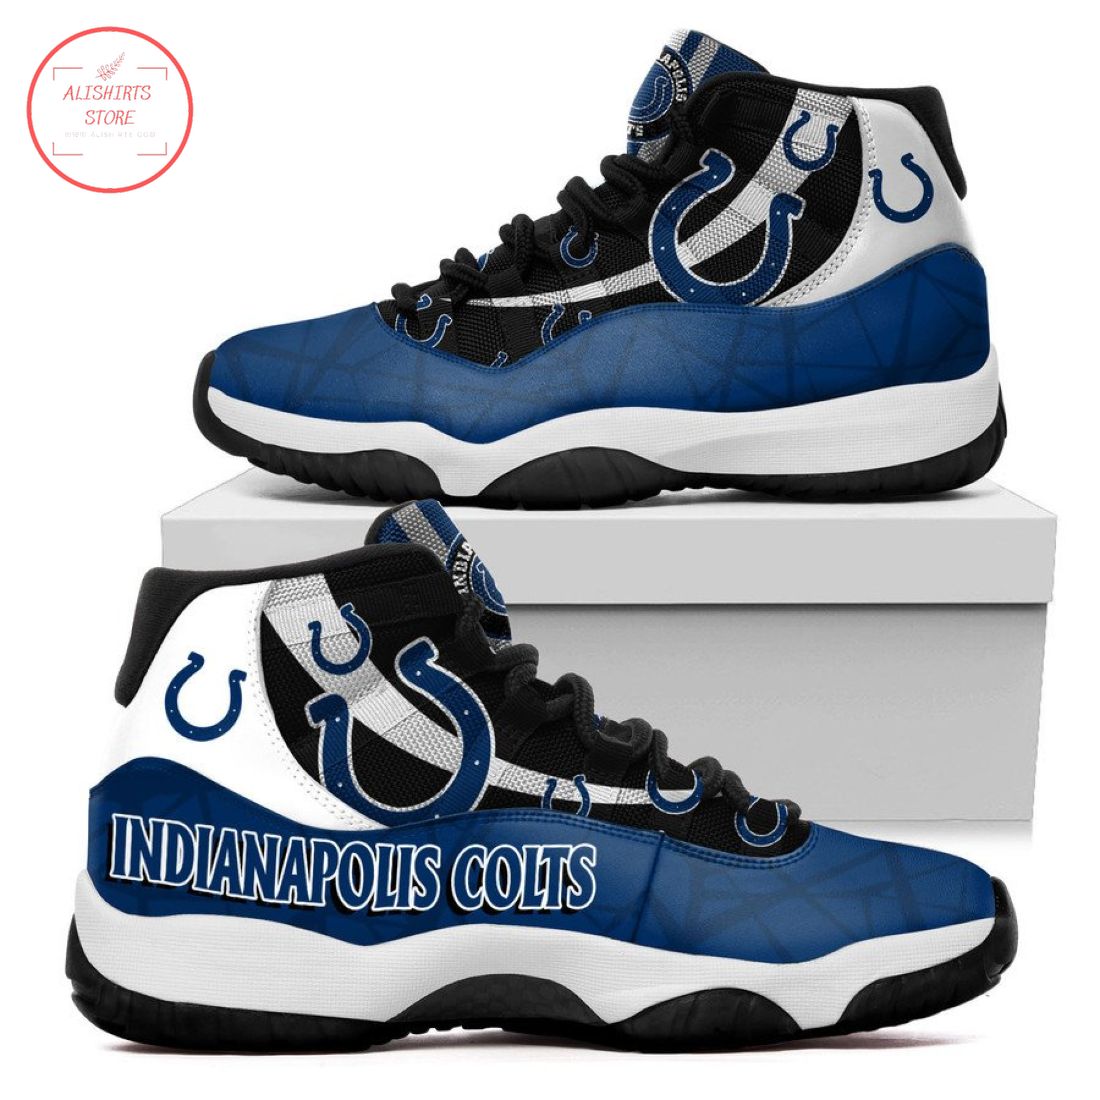 NFL Indianapolis Colts New Air Jordan 11 Sneakers Shoes